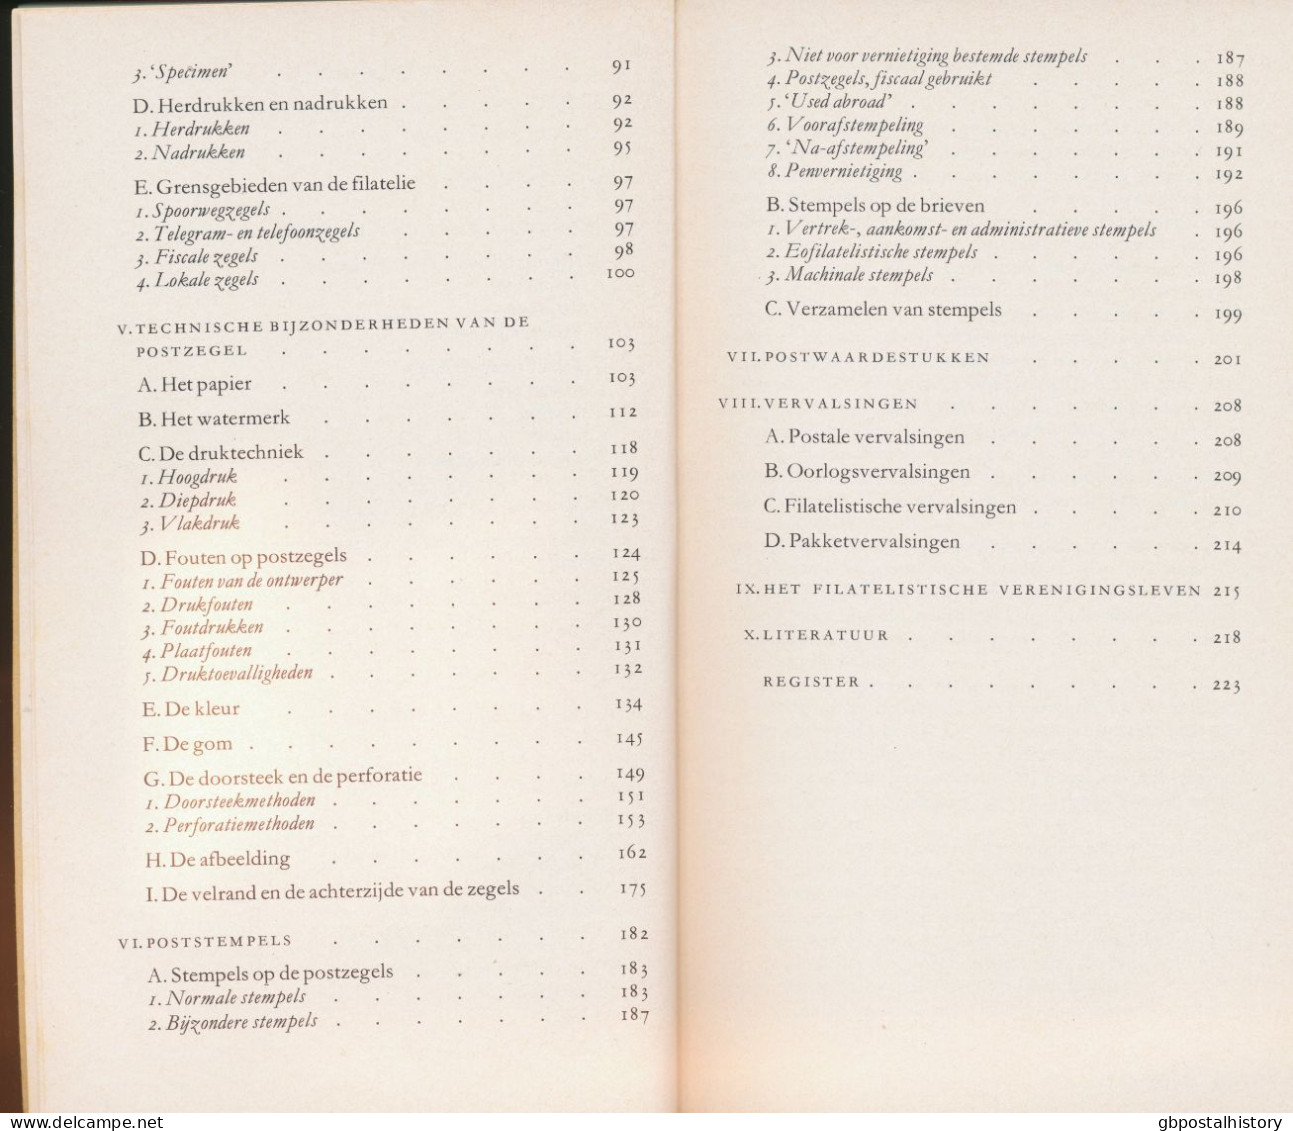 Prisma Postzegelgids. S/B By Mr. H.J. Bernsen, 1967, 224 Pages In Dutch Language, ALL ABOUT COLLECTING STAMPS, Very Inte - Filatelia E Historia De Correos